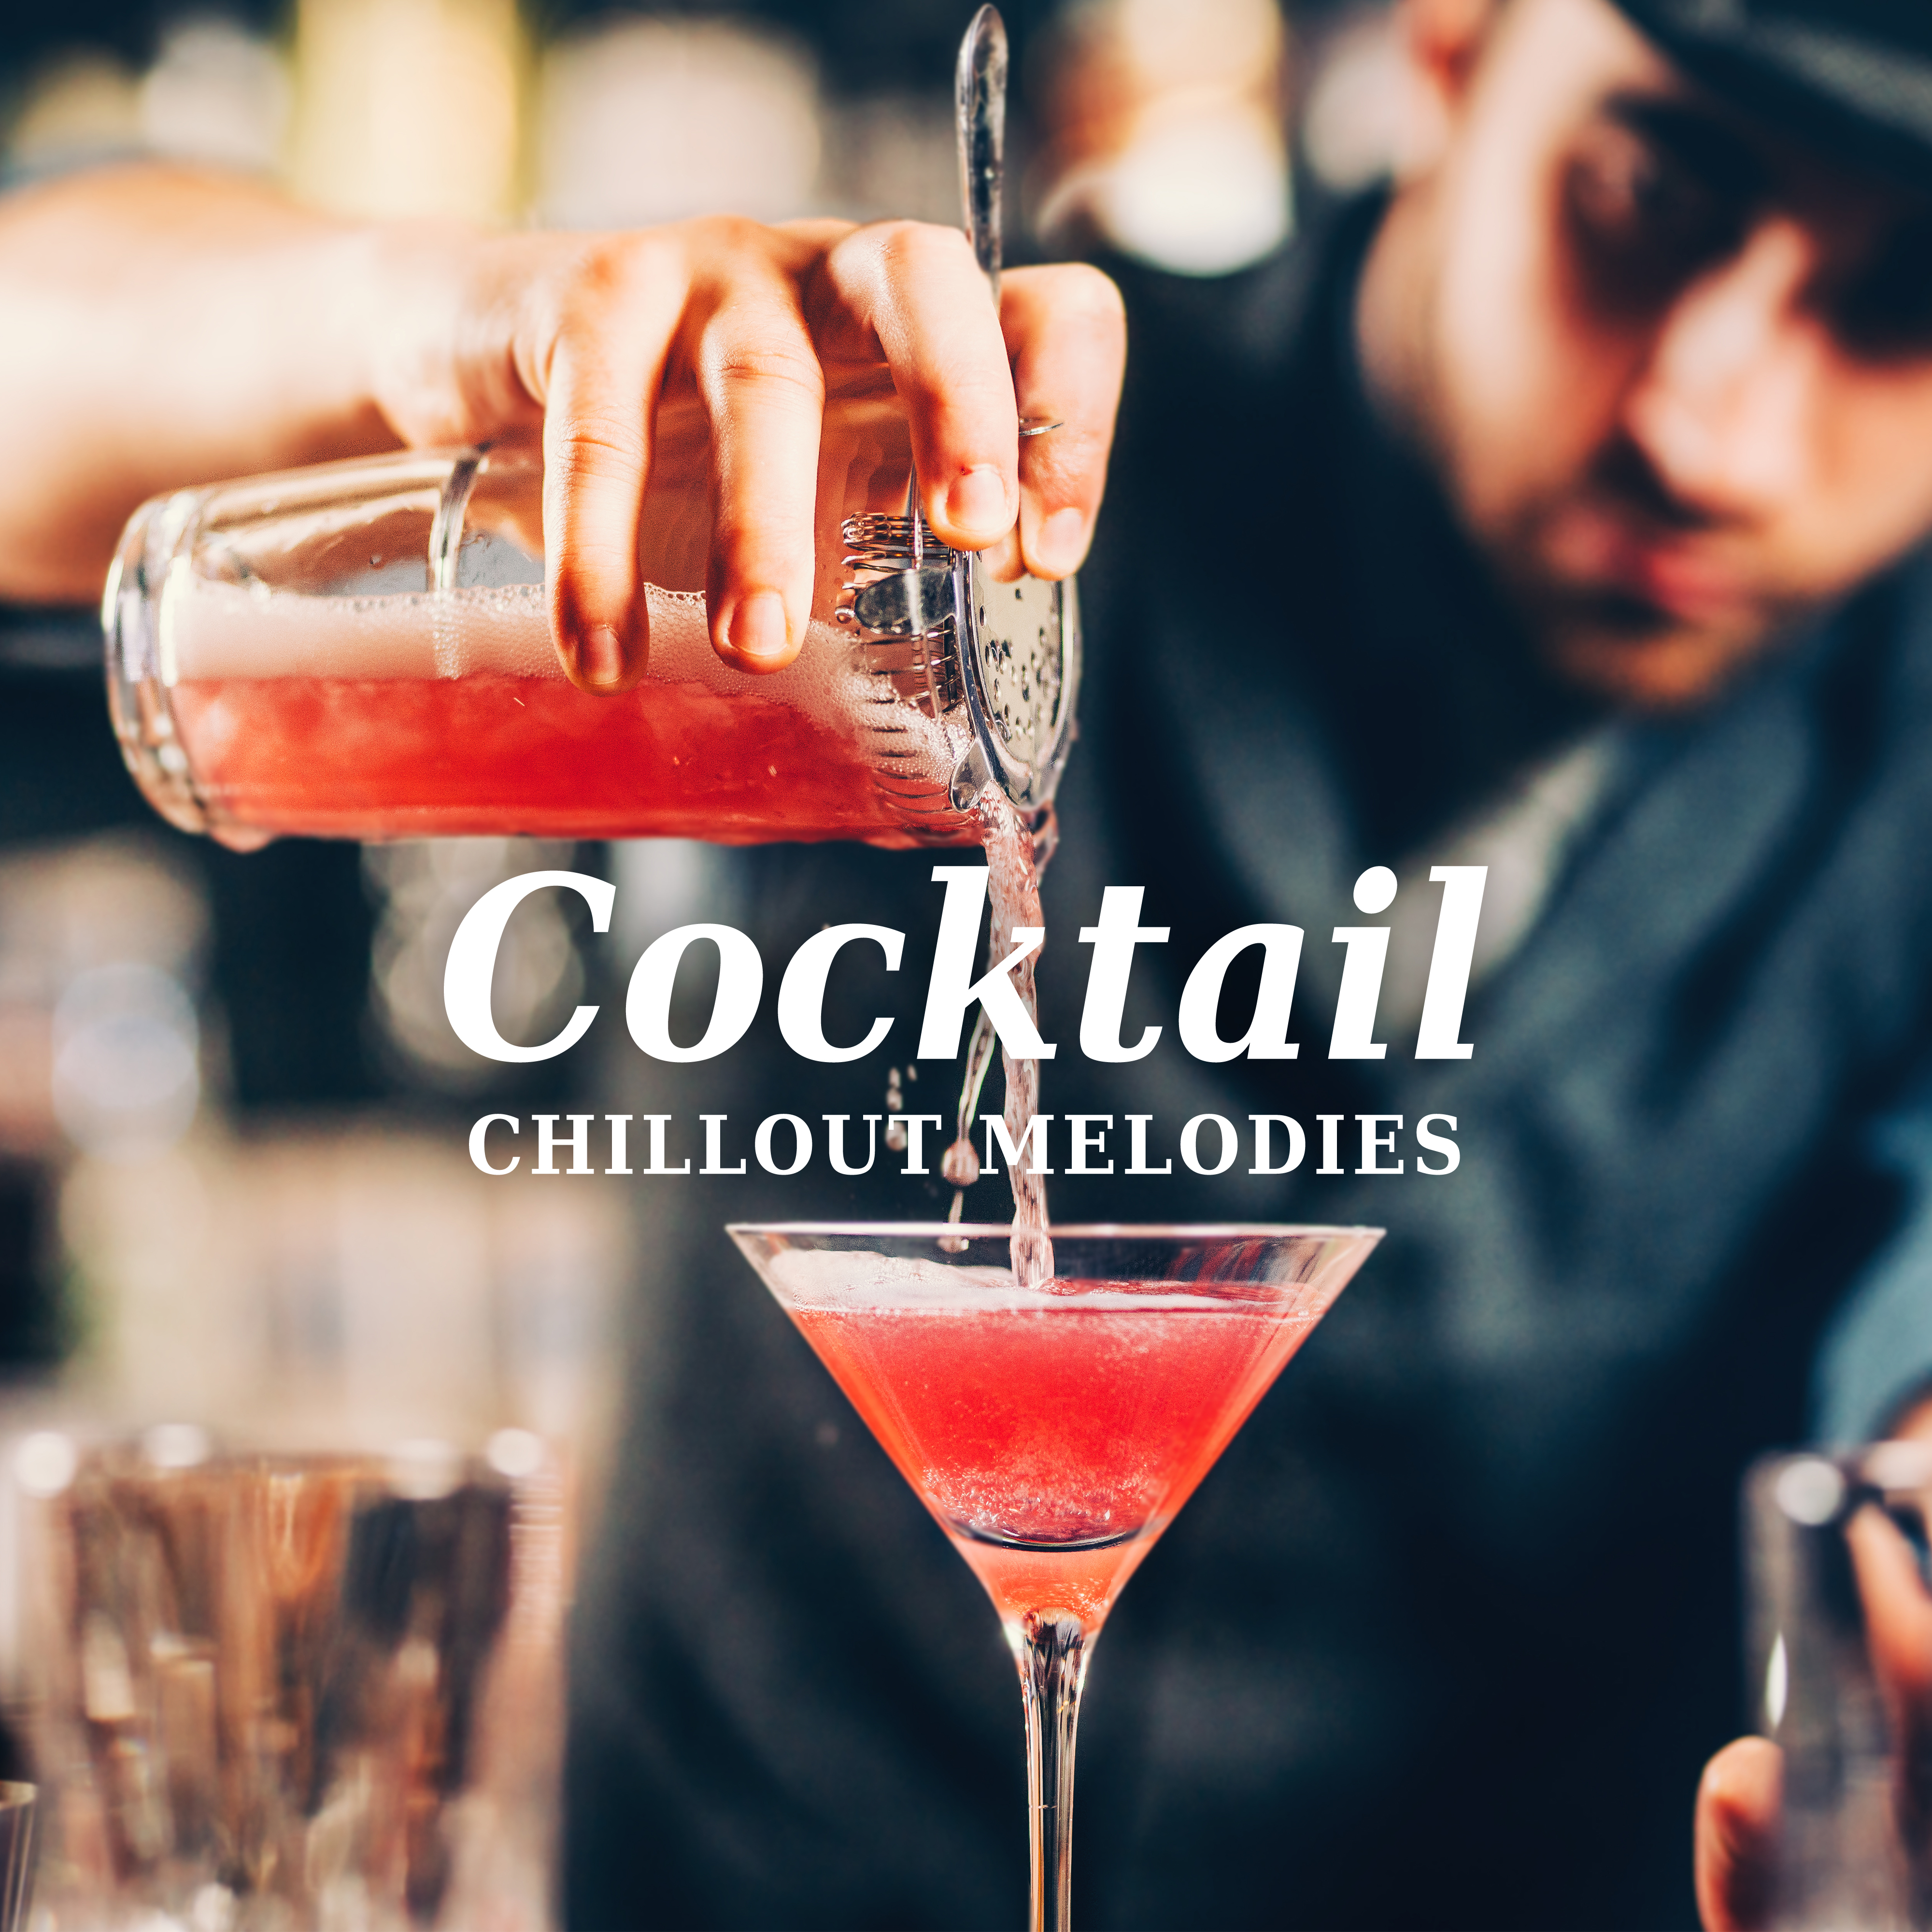 Cocktail Chillout Melodies